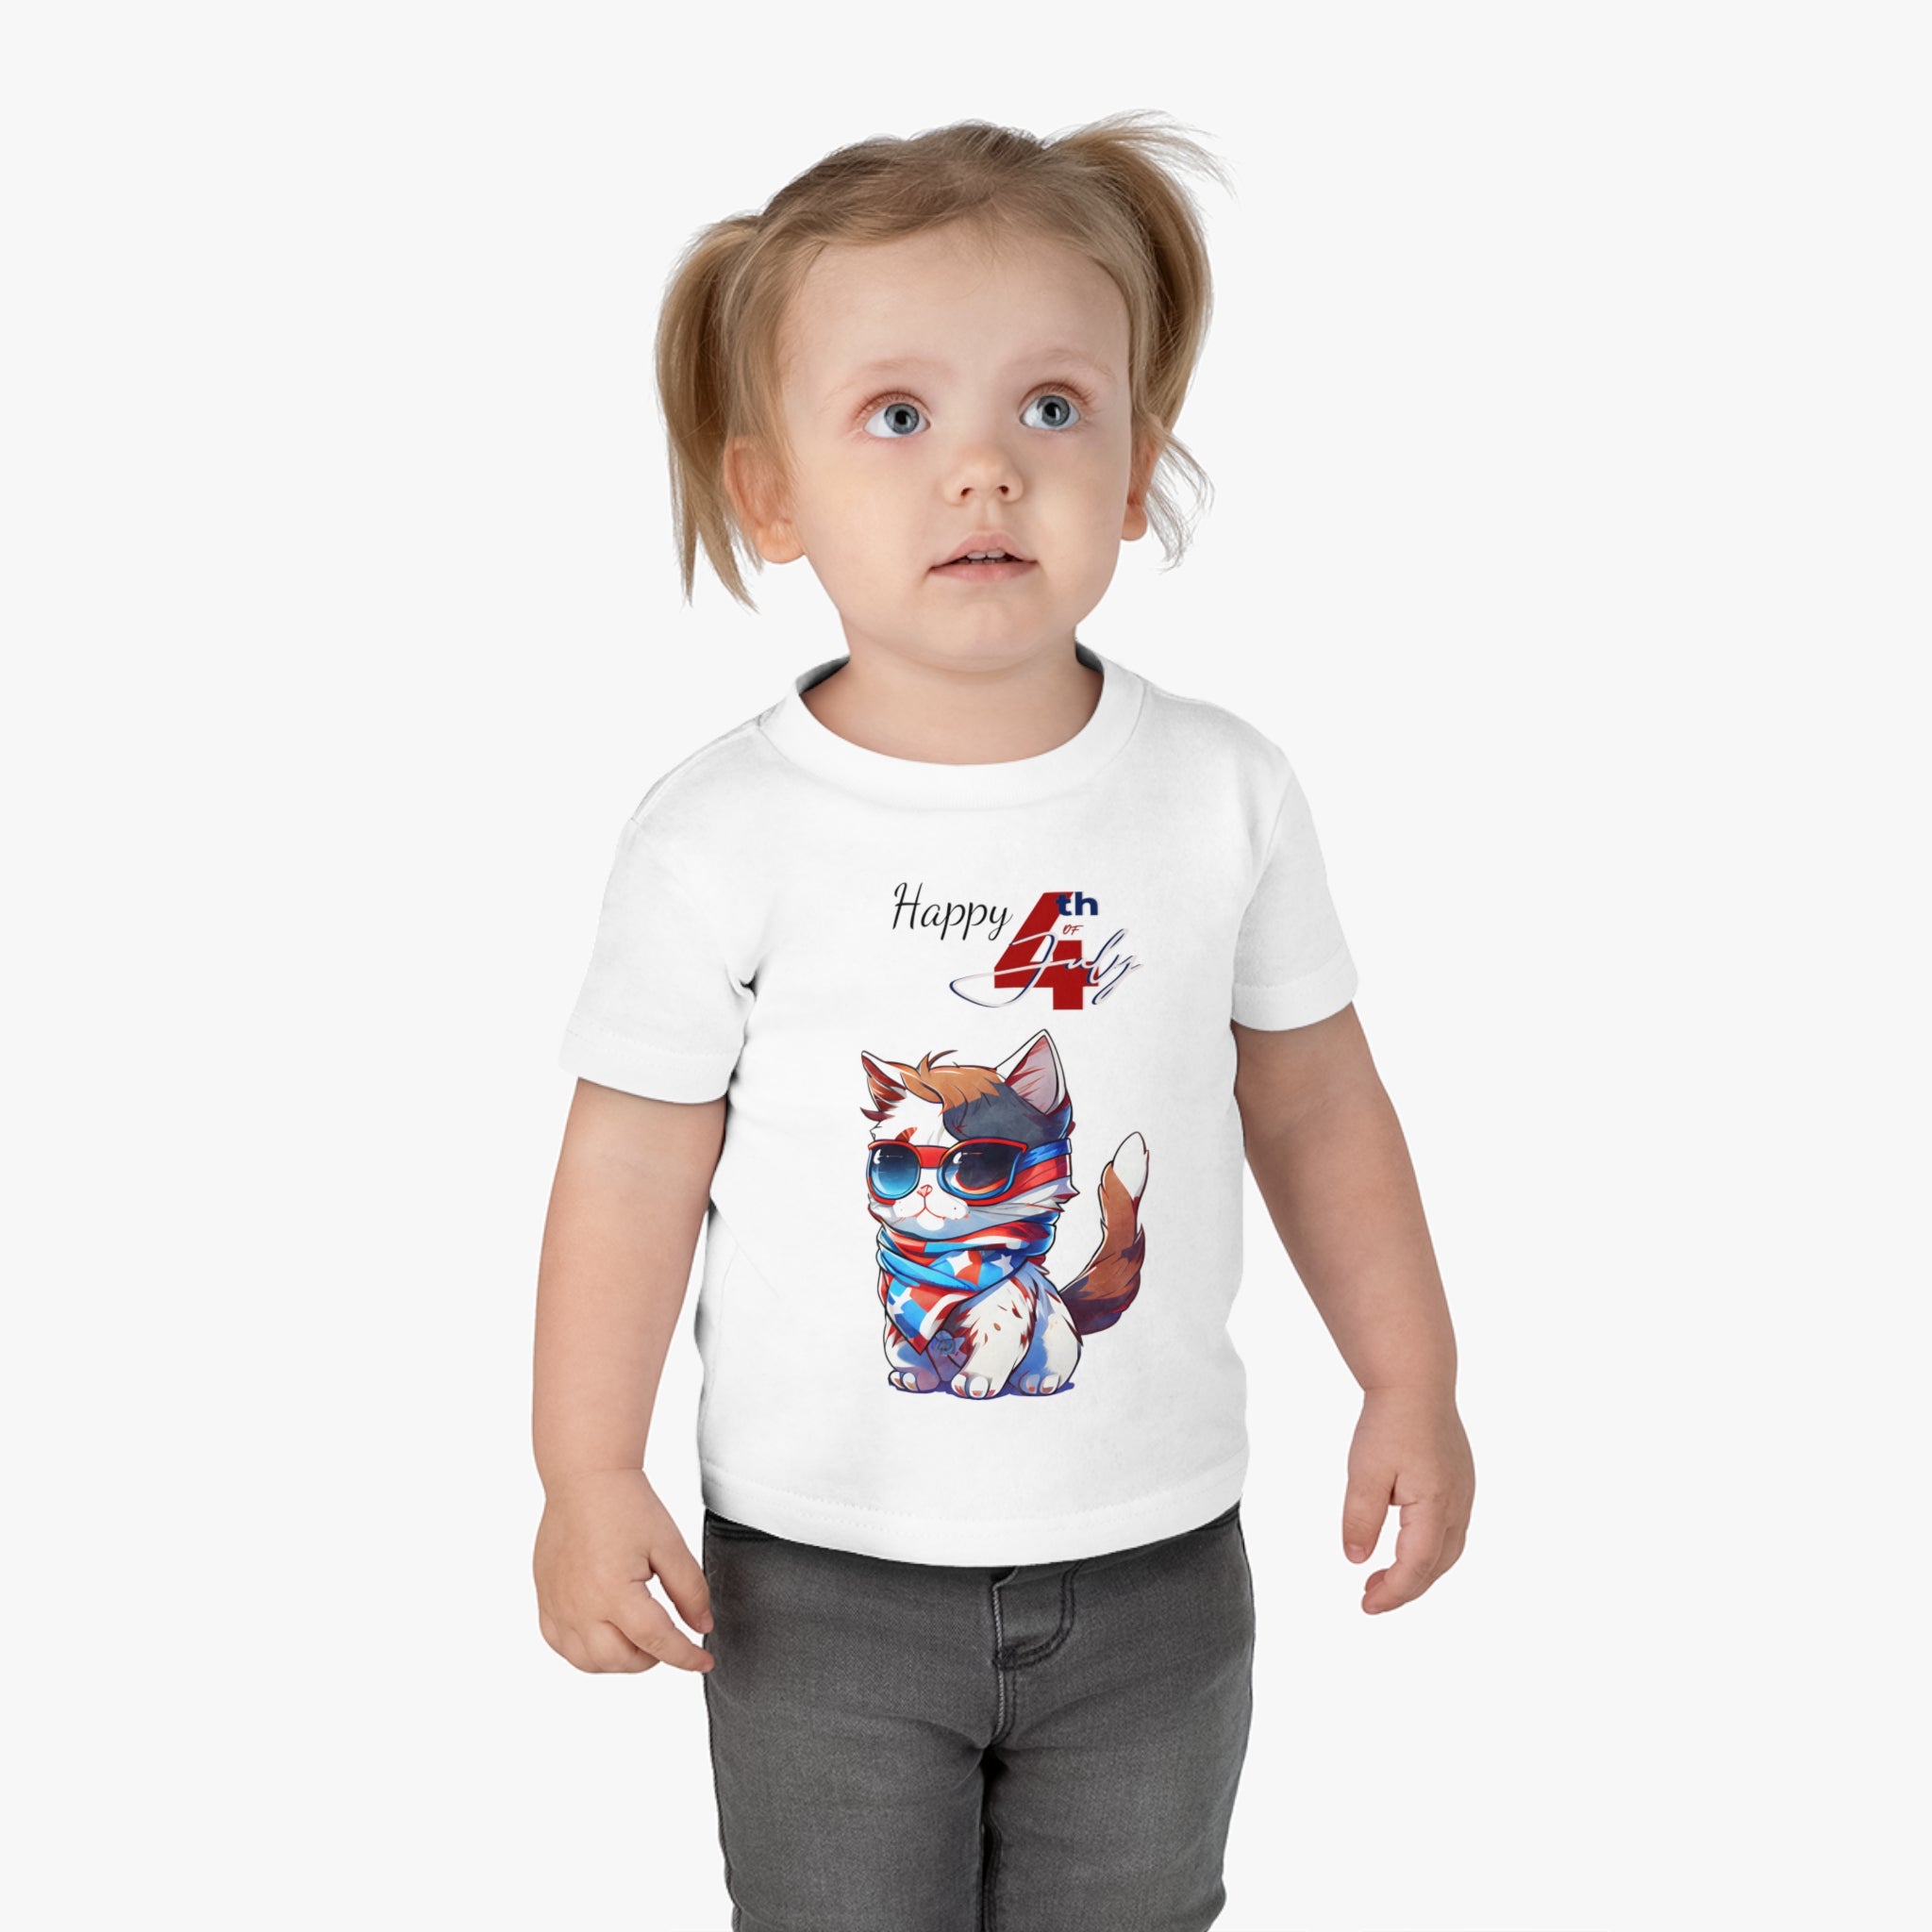 Happy 4th of July Stylish Cat Infant Shirt, Baby Tee, Infant Tee